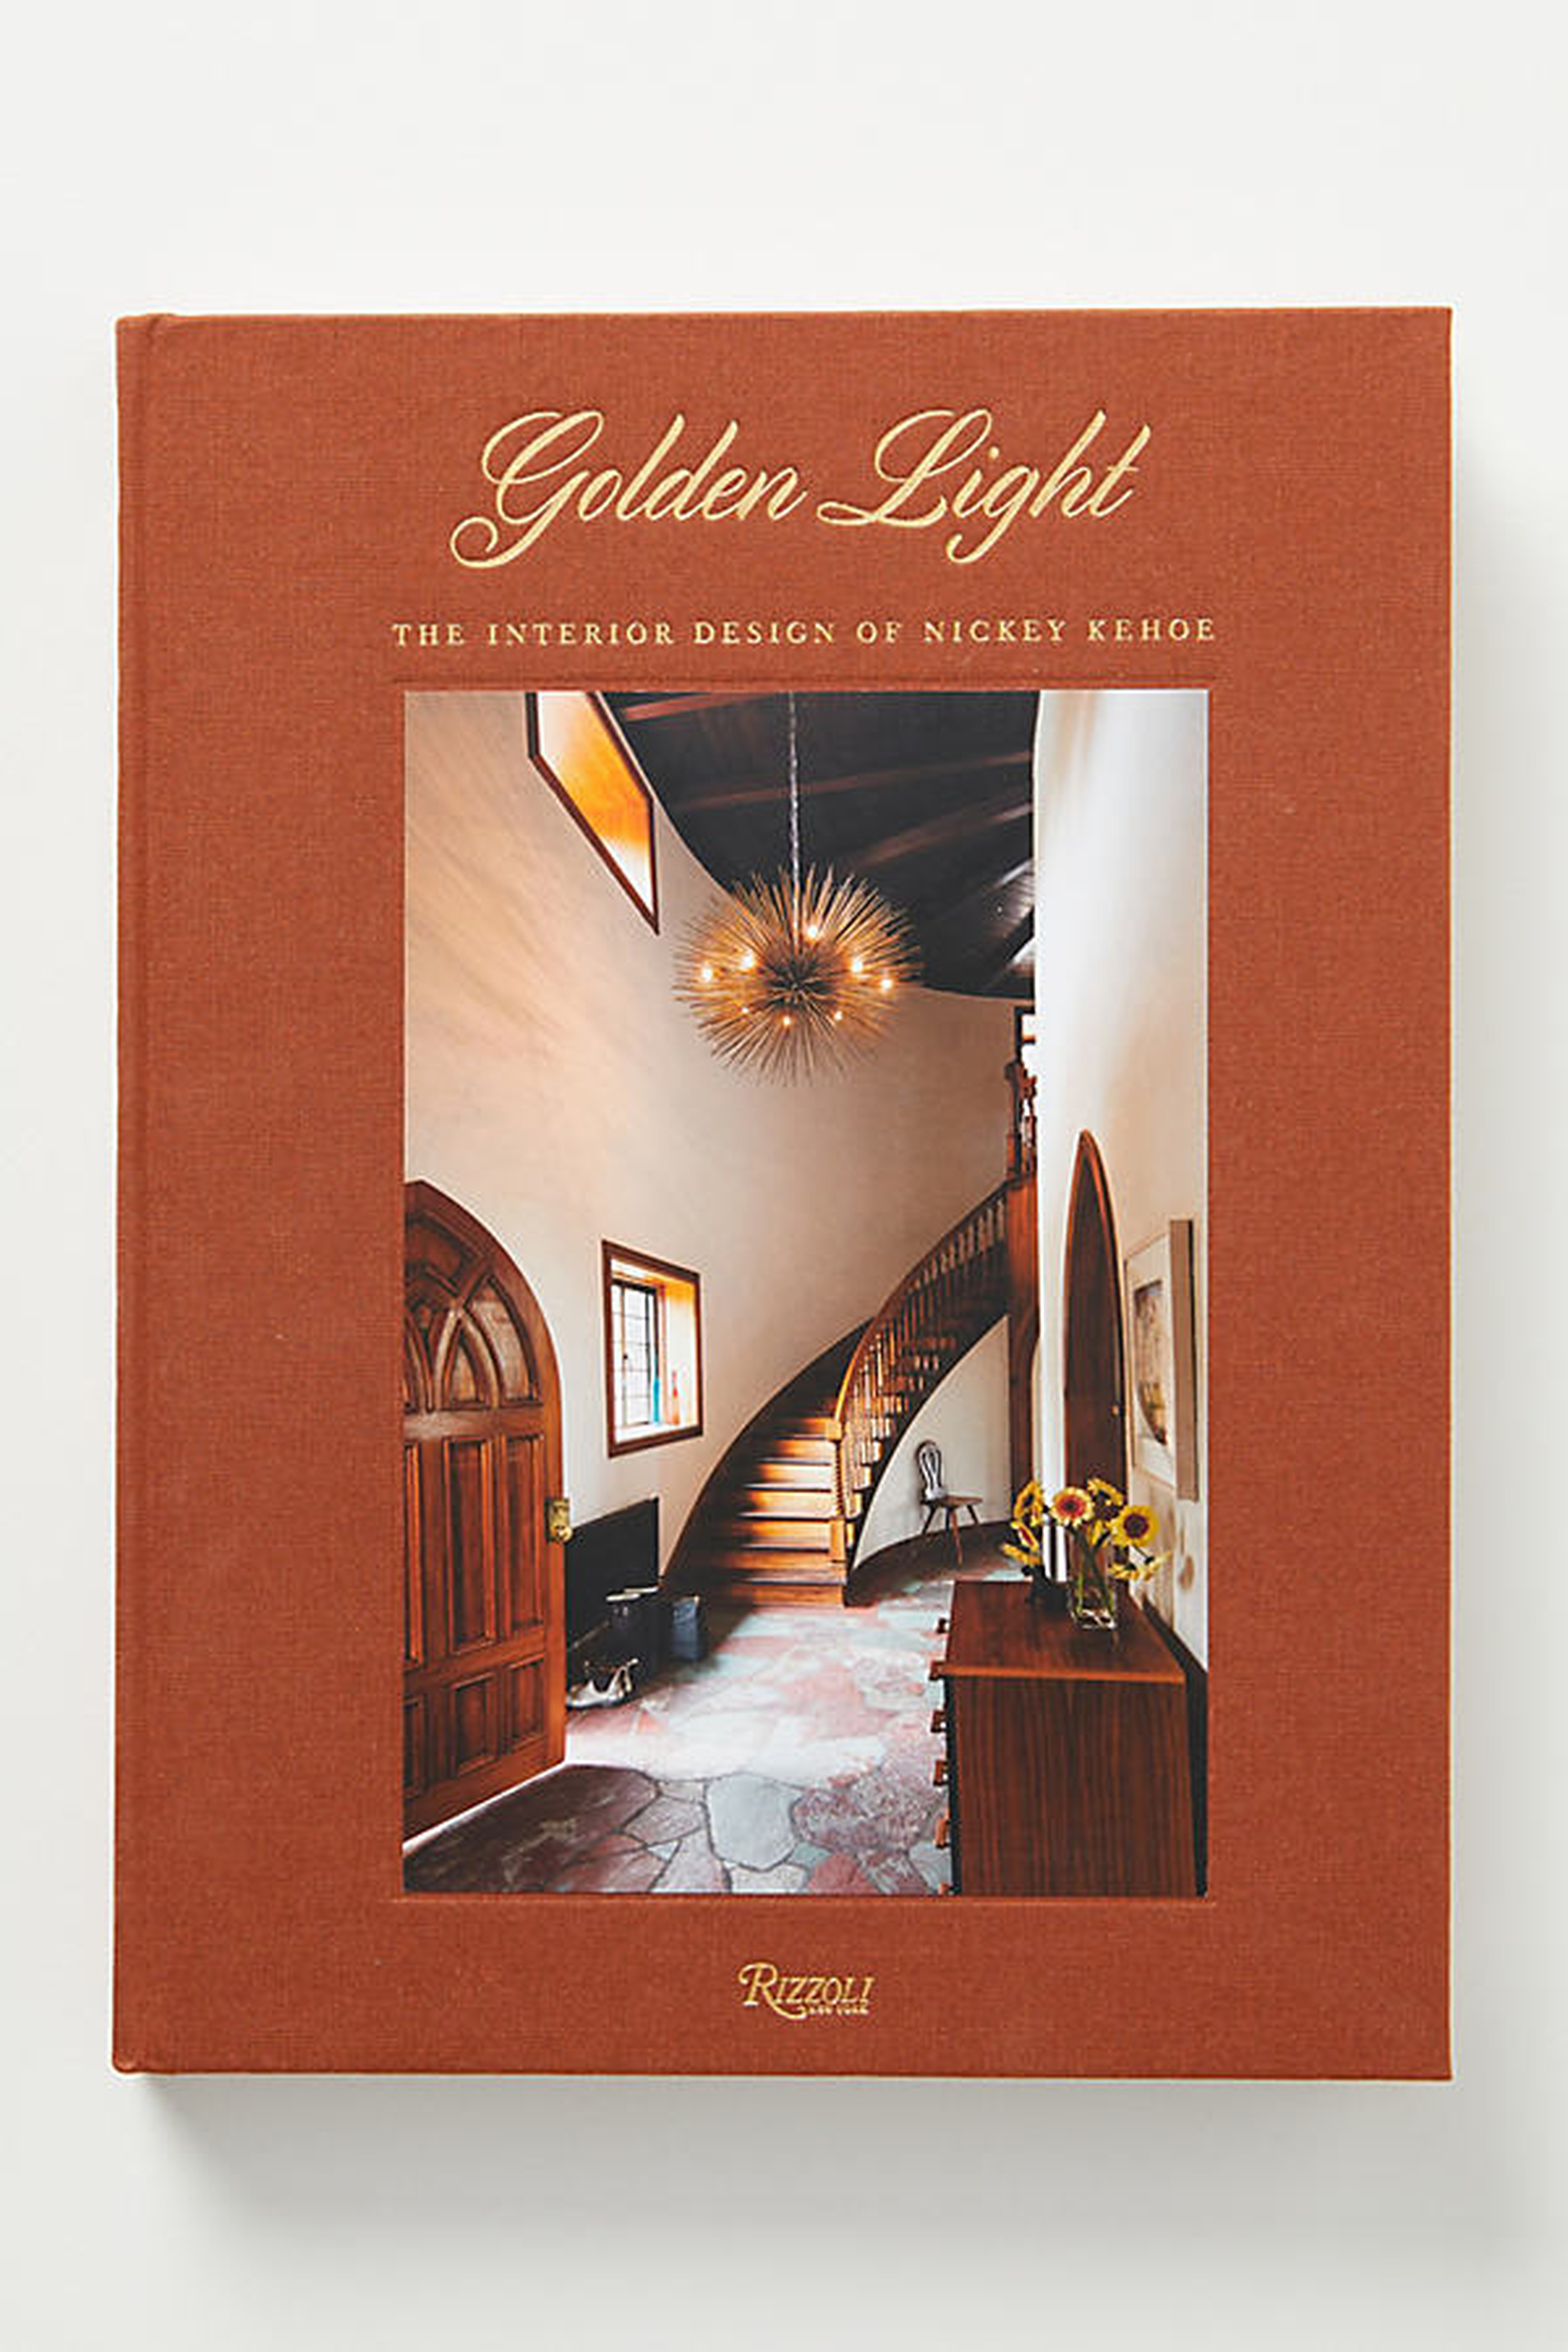 Golden Light By Anthropologie in Assorted - Anthropologie